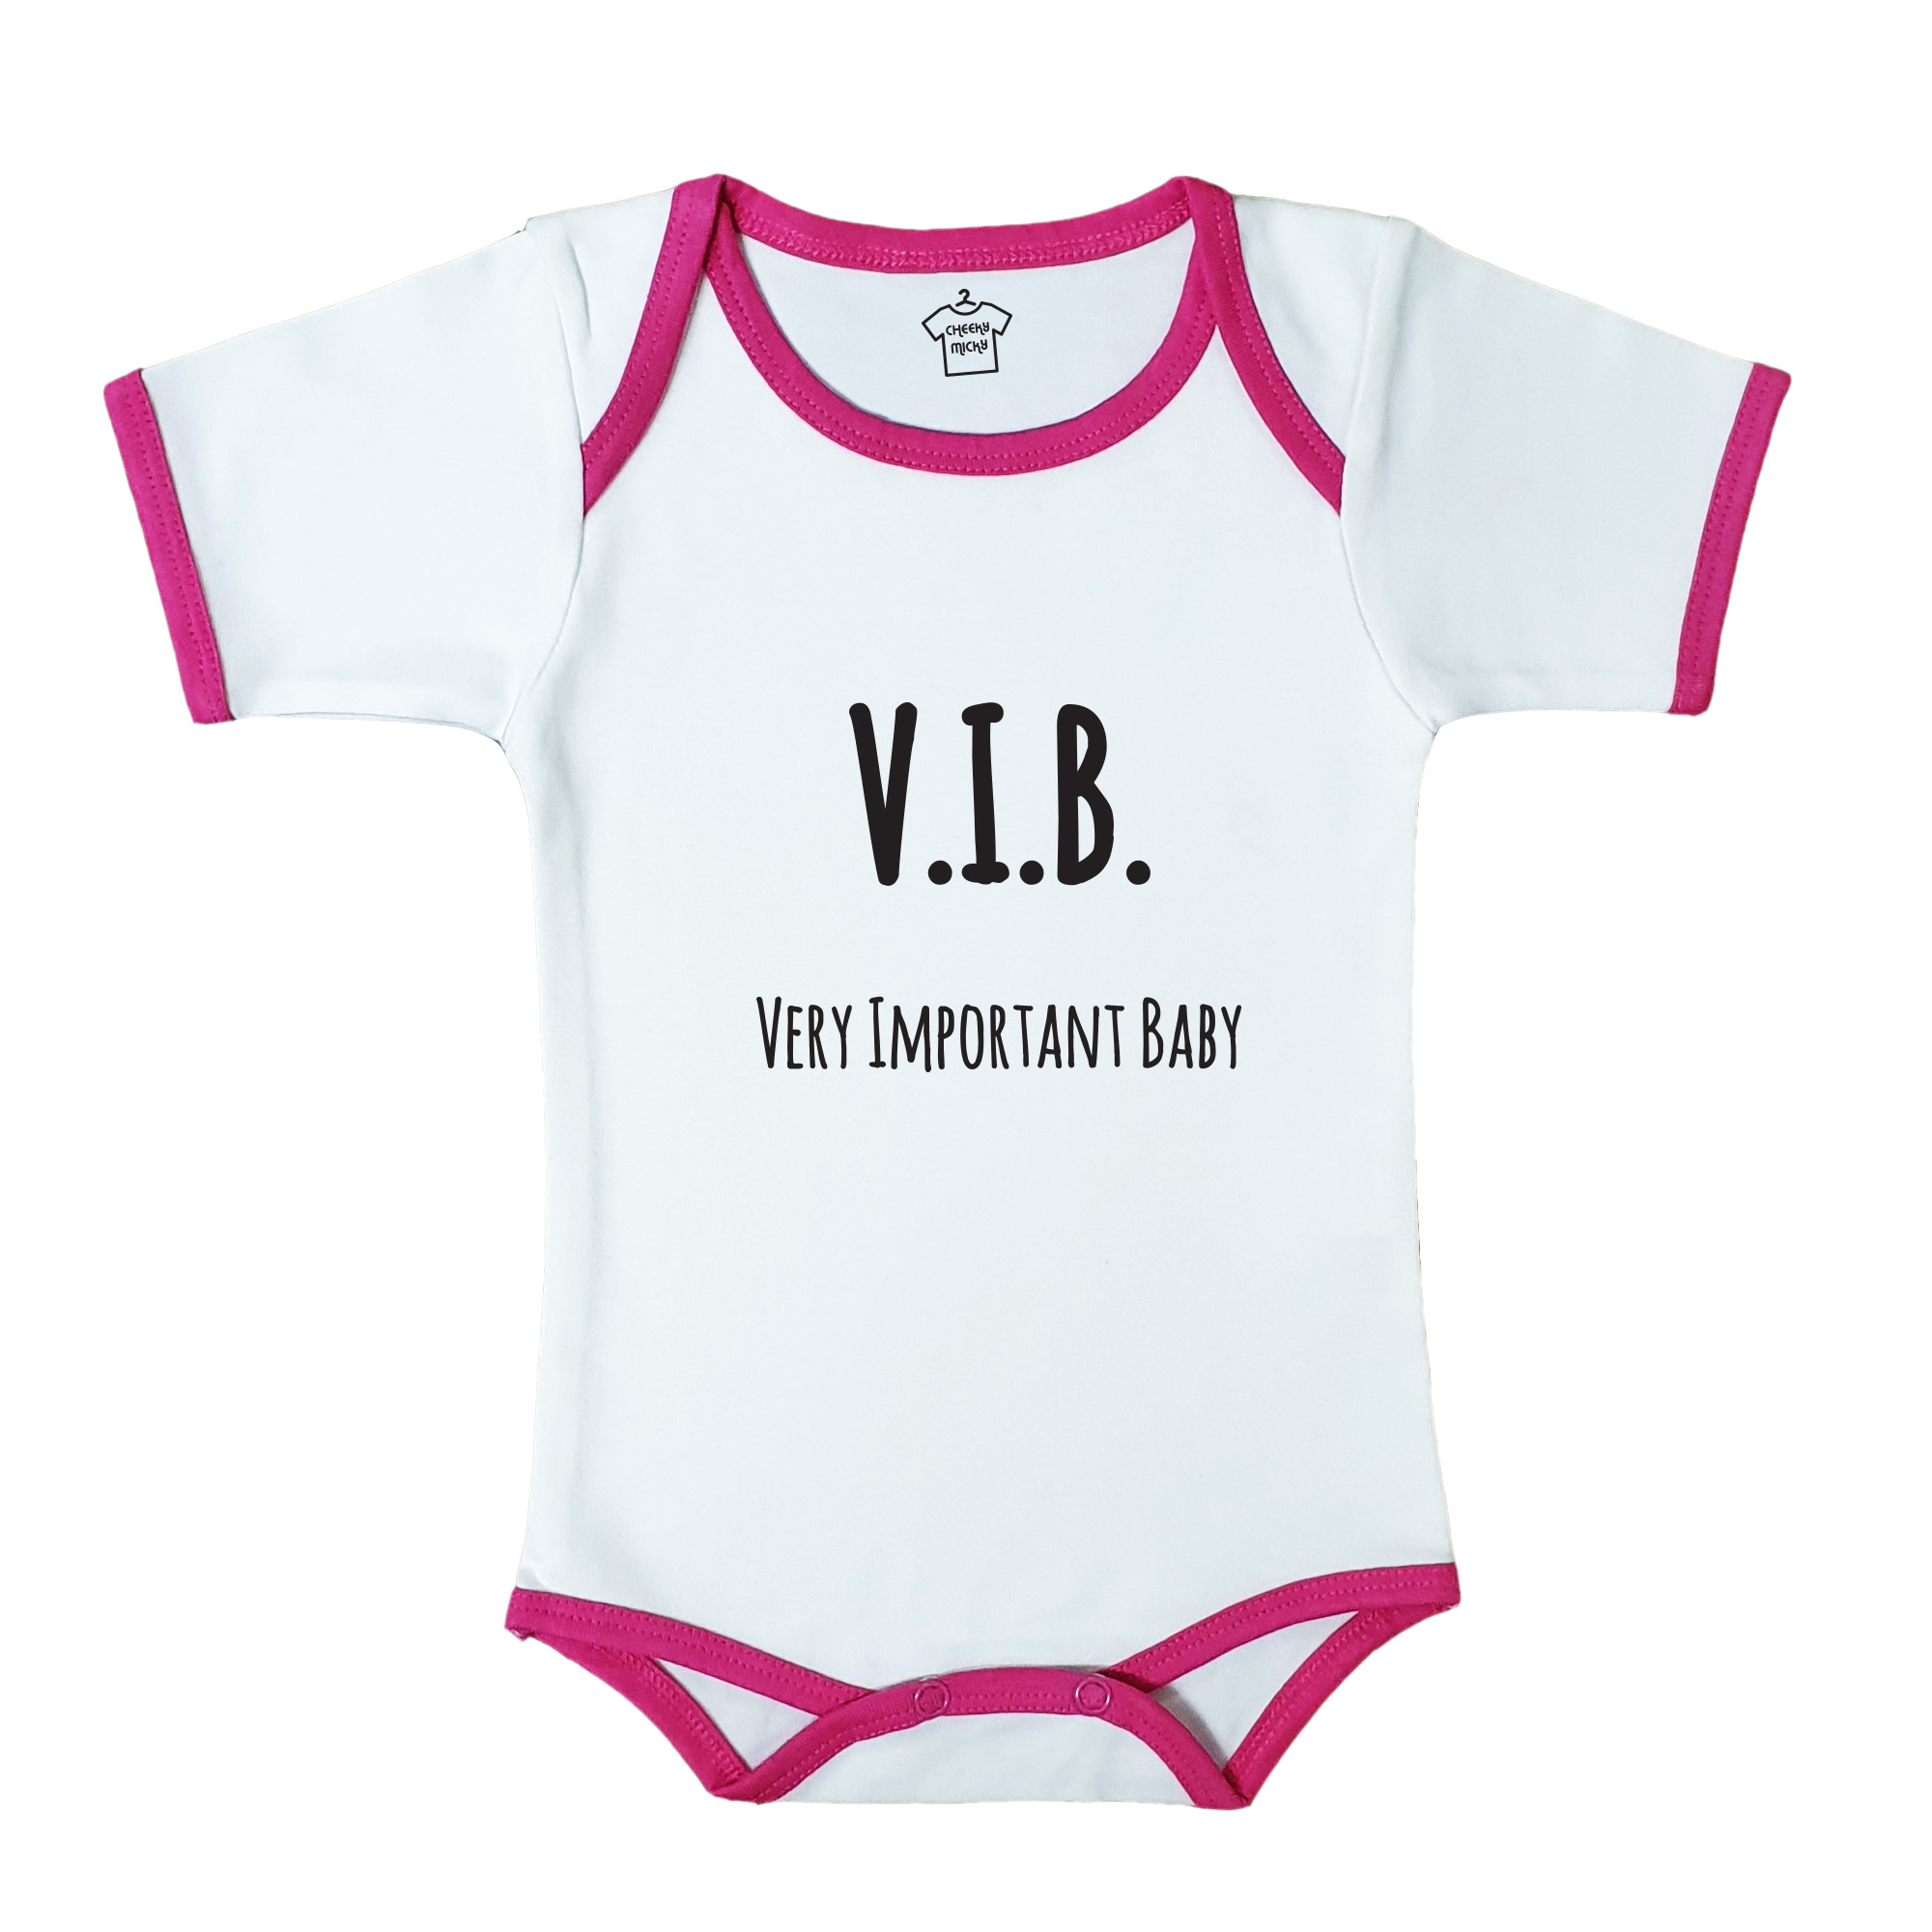 Soft baby body suit with pink trim, 100% cotton, machine washable. Age 6-12 months. Print: V.I.B. Very Important Baby.